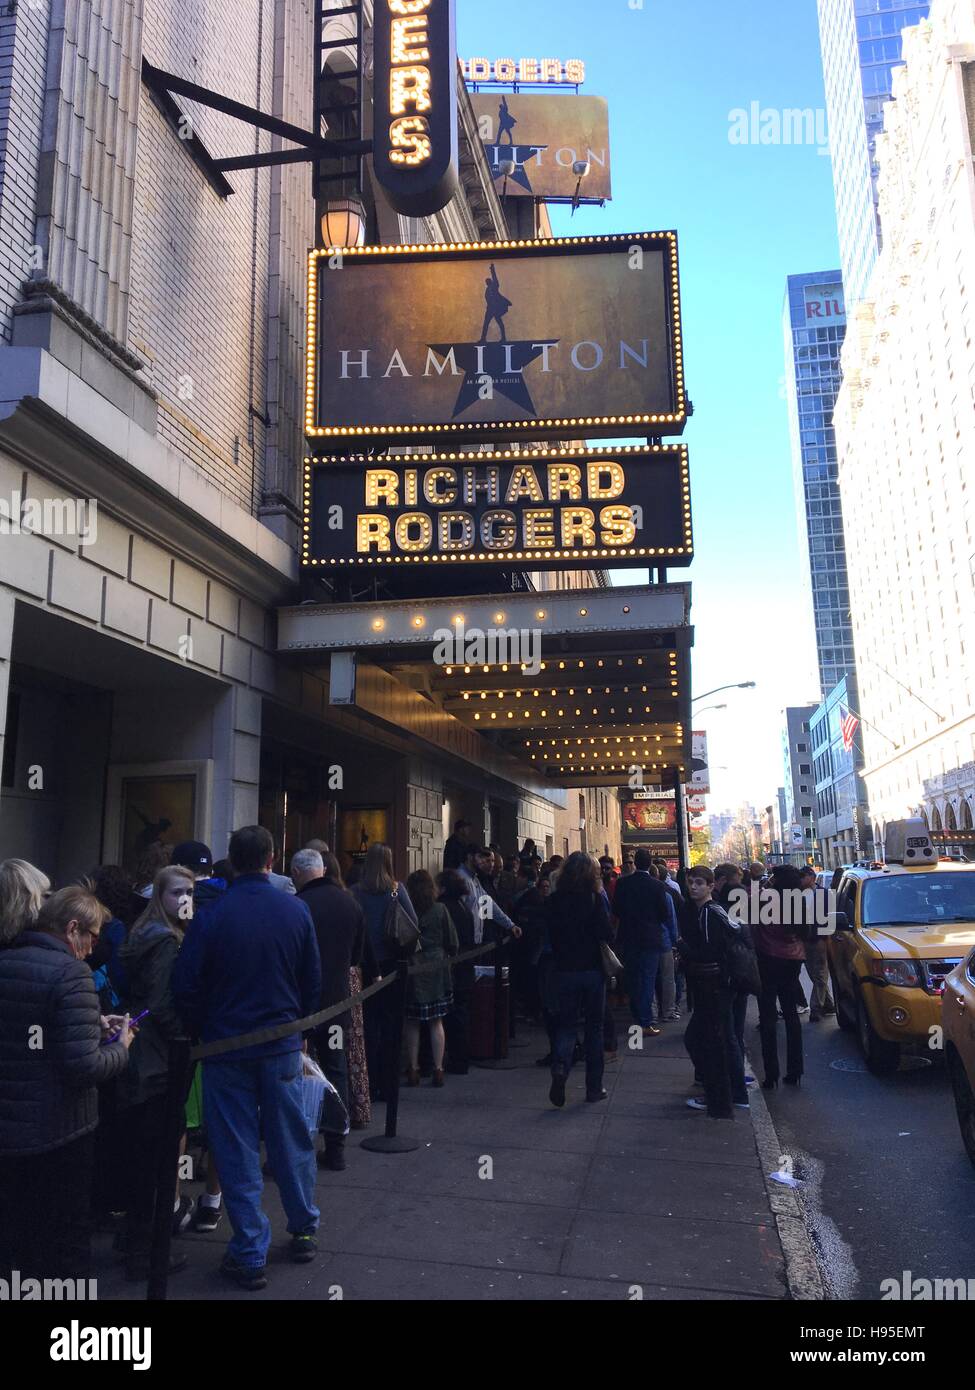 New York, NY, USA. 19th Nov, 2016. 'Hamilton' ticket holders wait in line at the Richard Rodgers Theater in Times Square the afternoon after Vice-President Elect Mike Pence was reportedly booed while attending a performance of the Broadway musical and where cast member Brandon Victor Dixon addressed Pence directly during the curtain call in New York, New York on November 19, 2016. © Rainmaker Photo/Media Punch/Alamy Live News Stock Photo